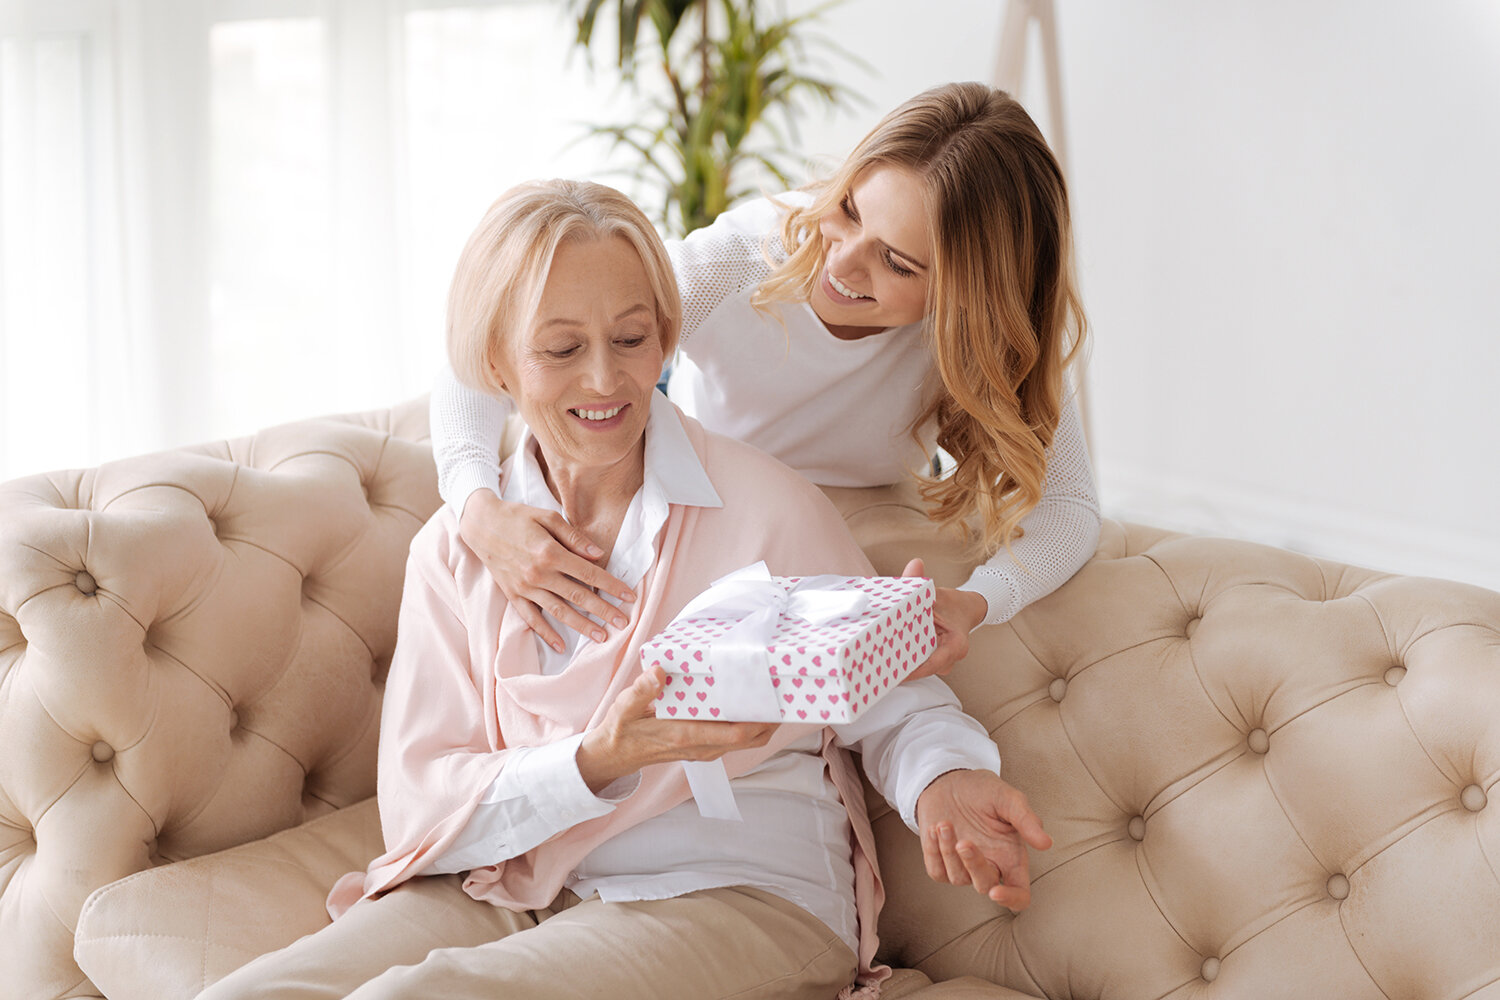 20 Gifts for Homebound Seniors - Stowell Associates